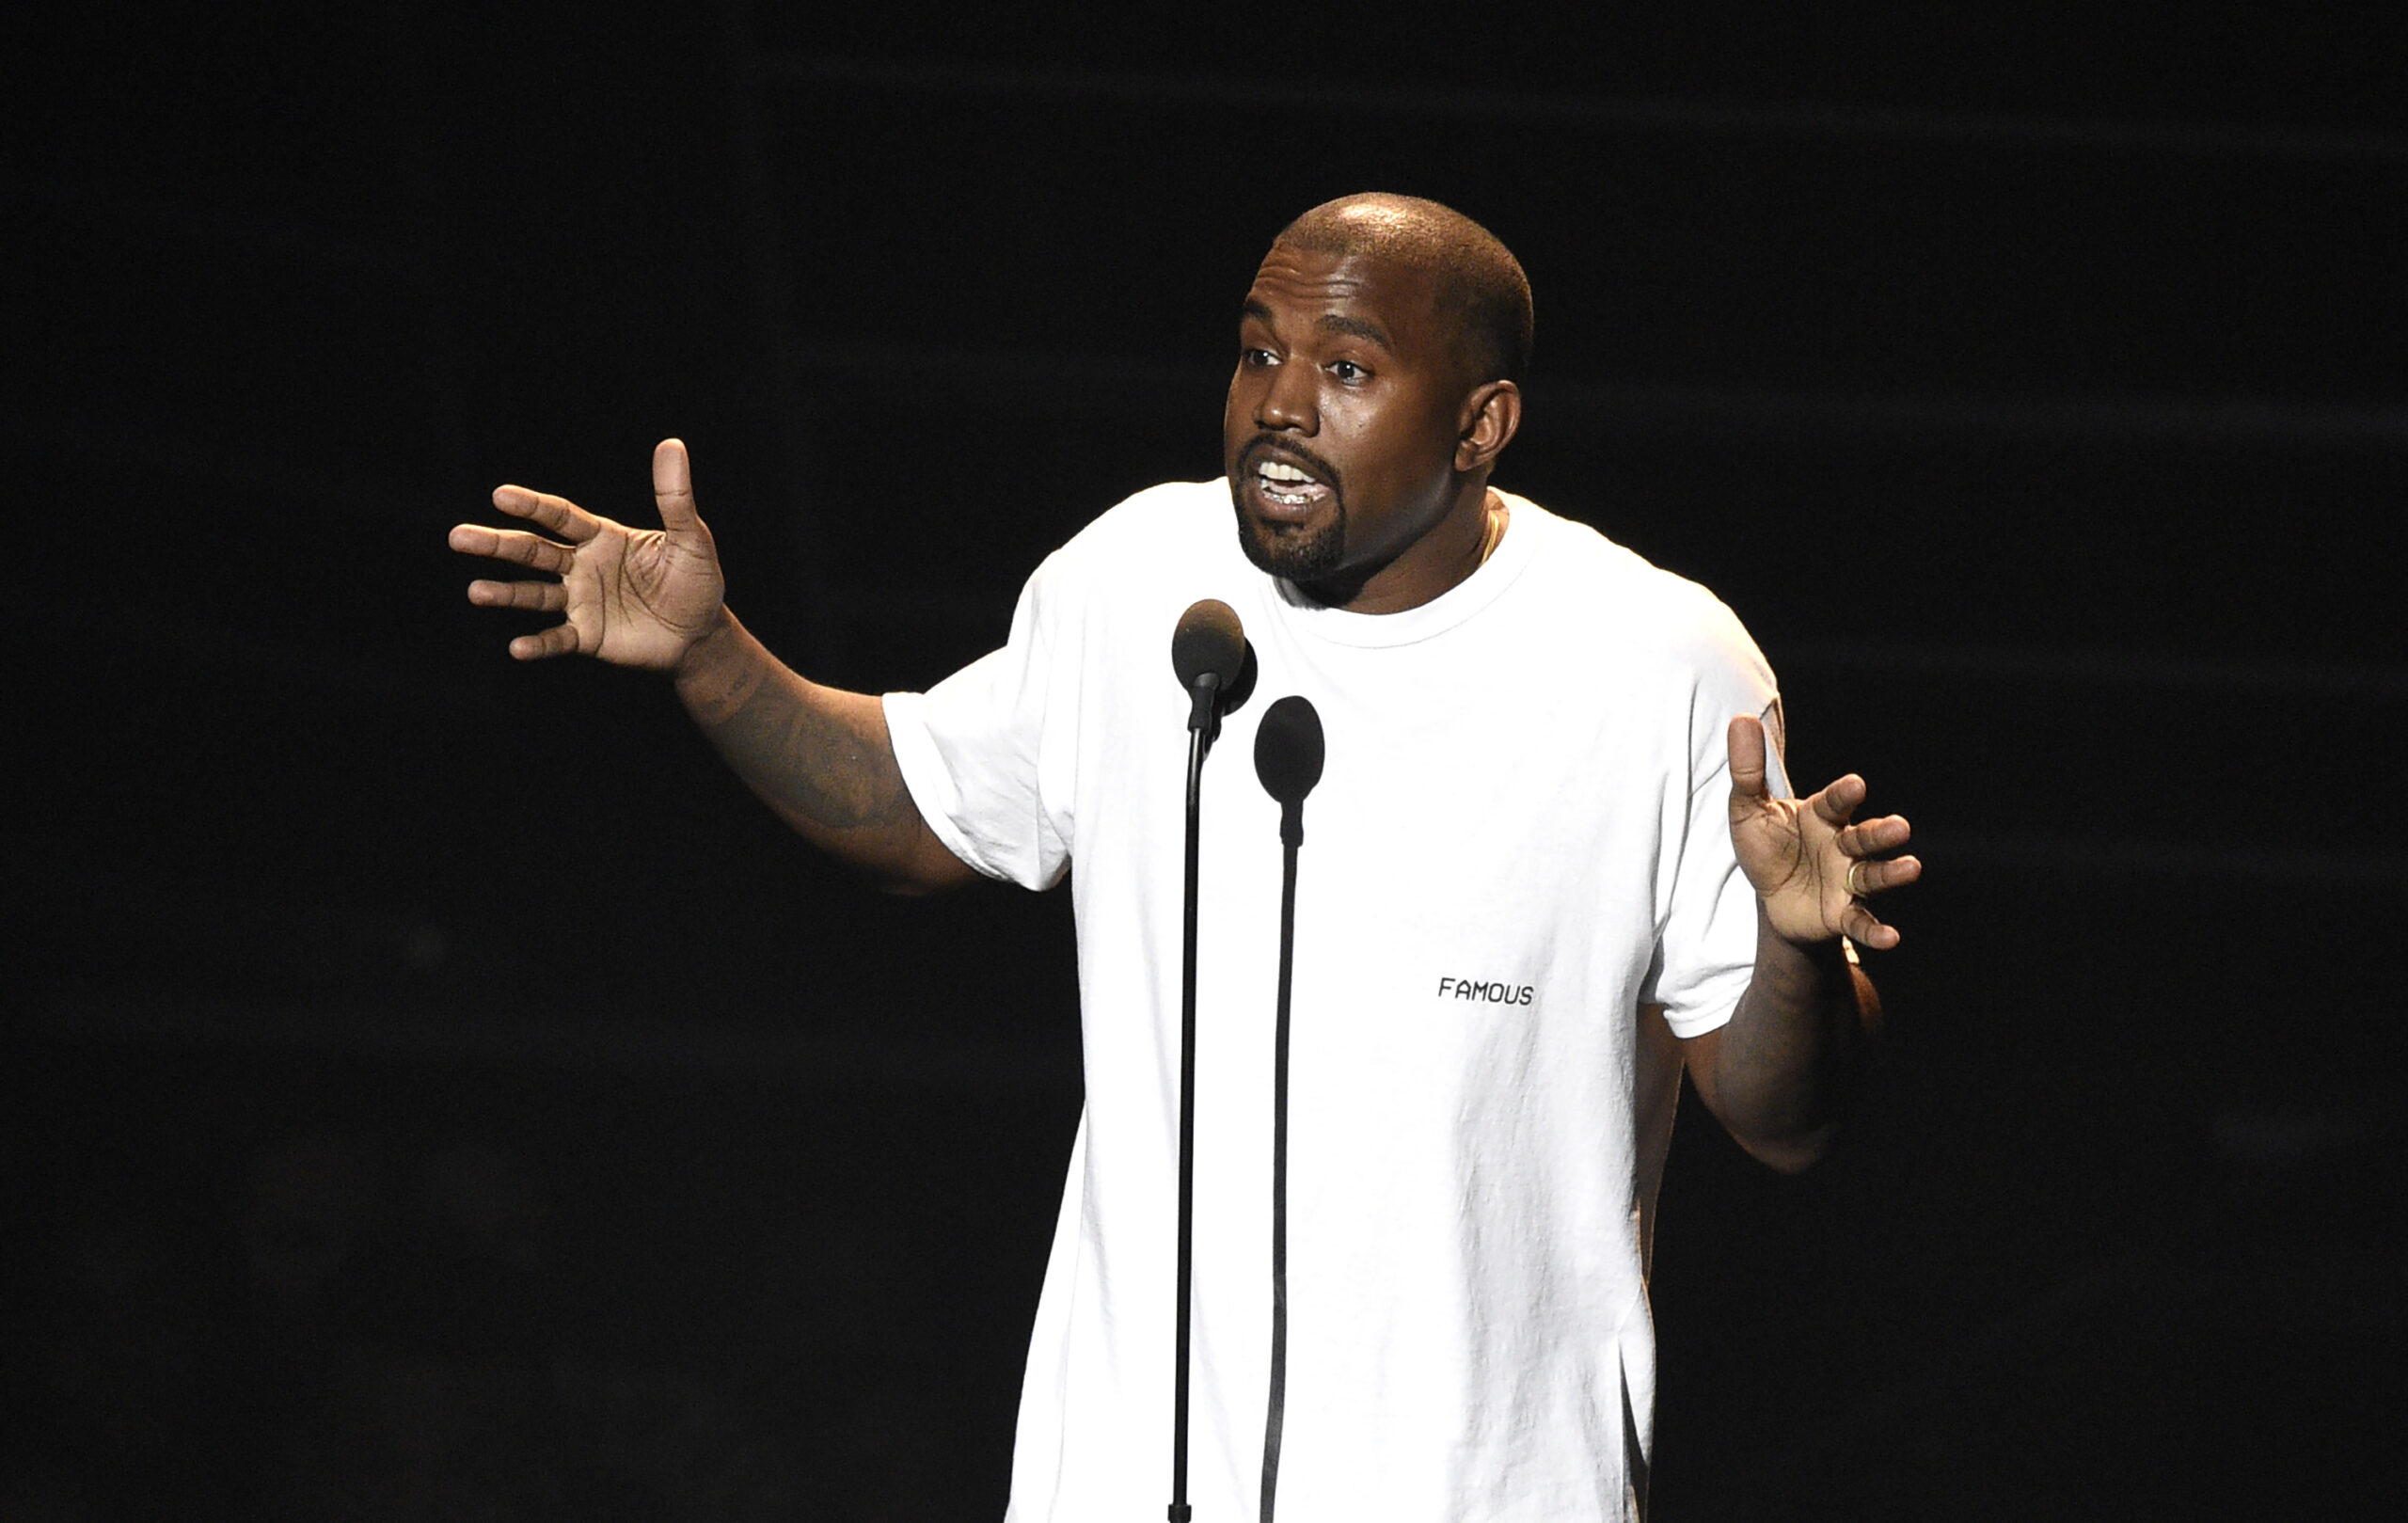 Kanye West speaks at the MTV Video Music Awards in 2016.